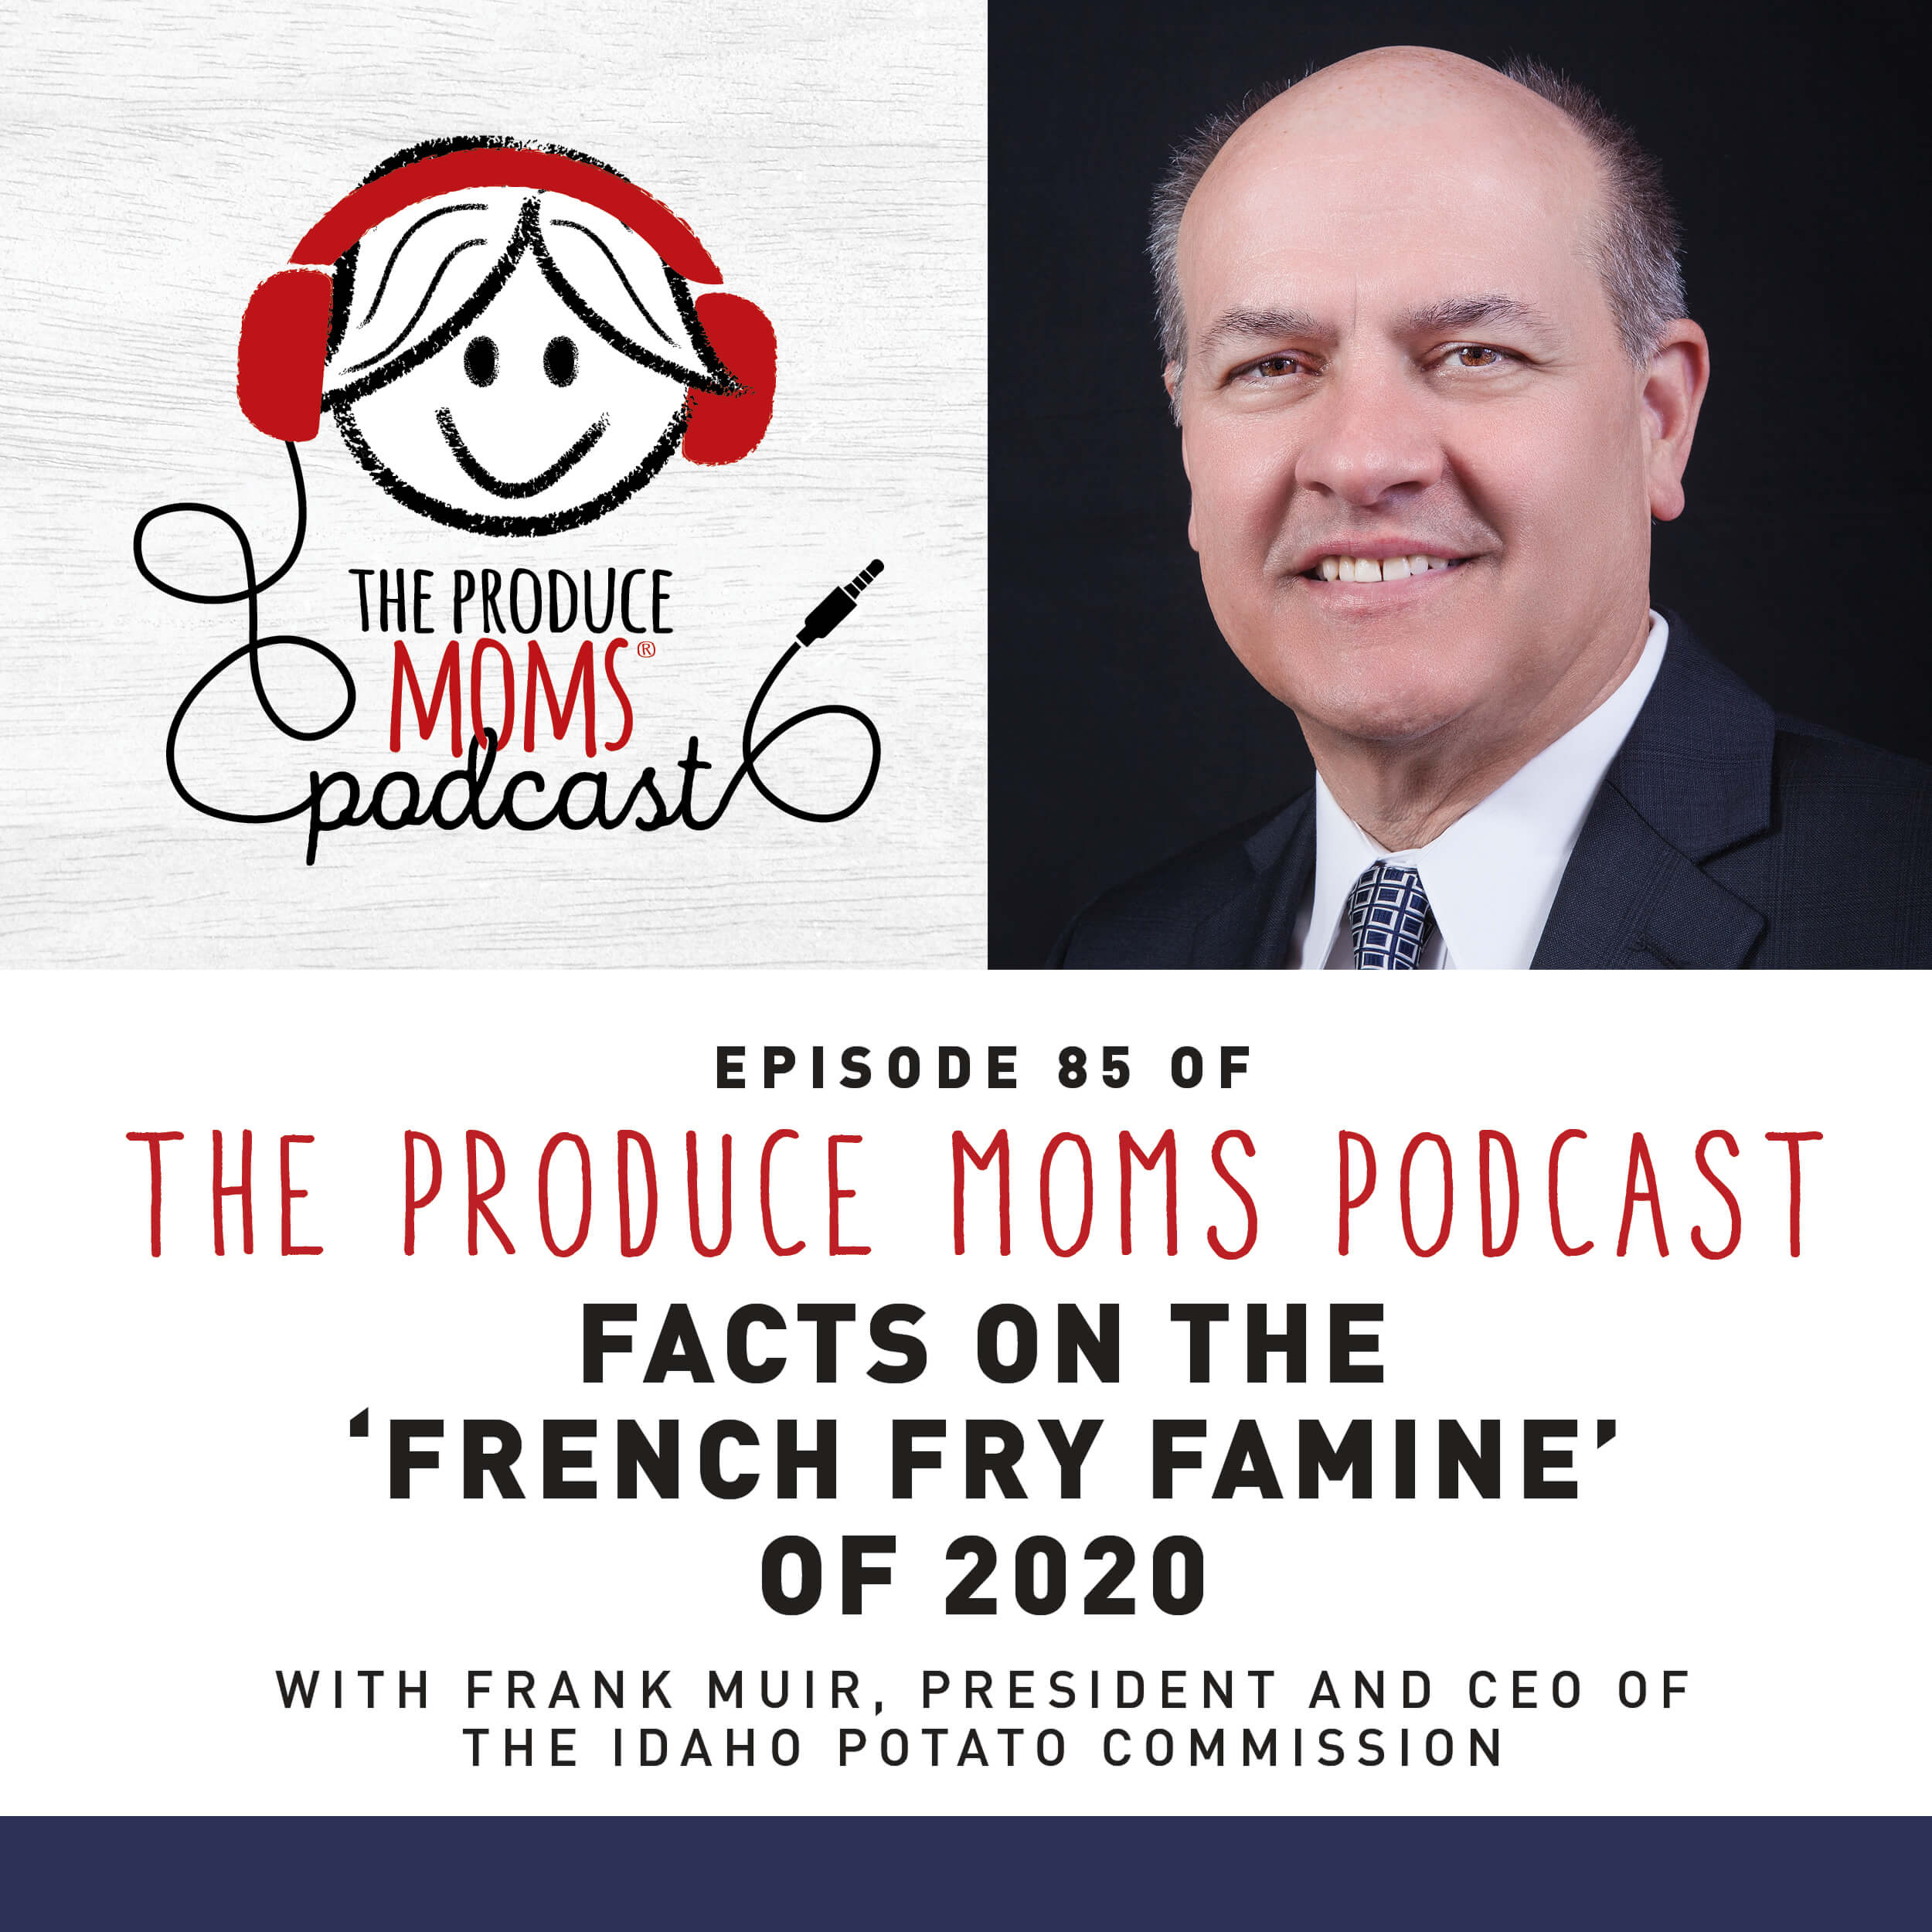 Episode 85: Facts on the French Fry Famine with Frank Muir, Idaho Potato Commission